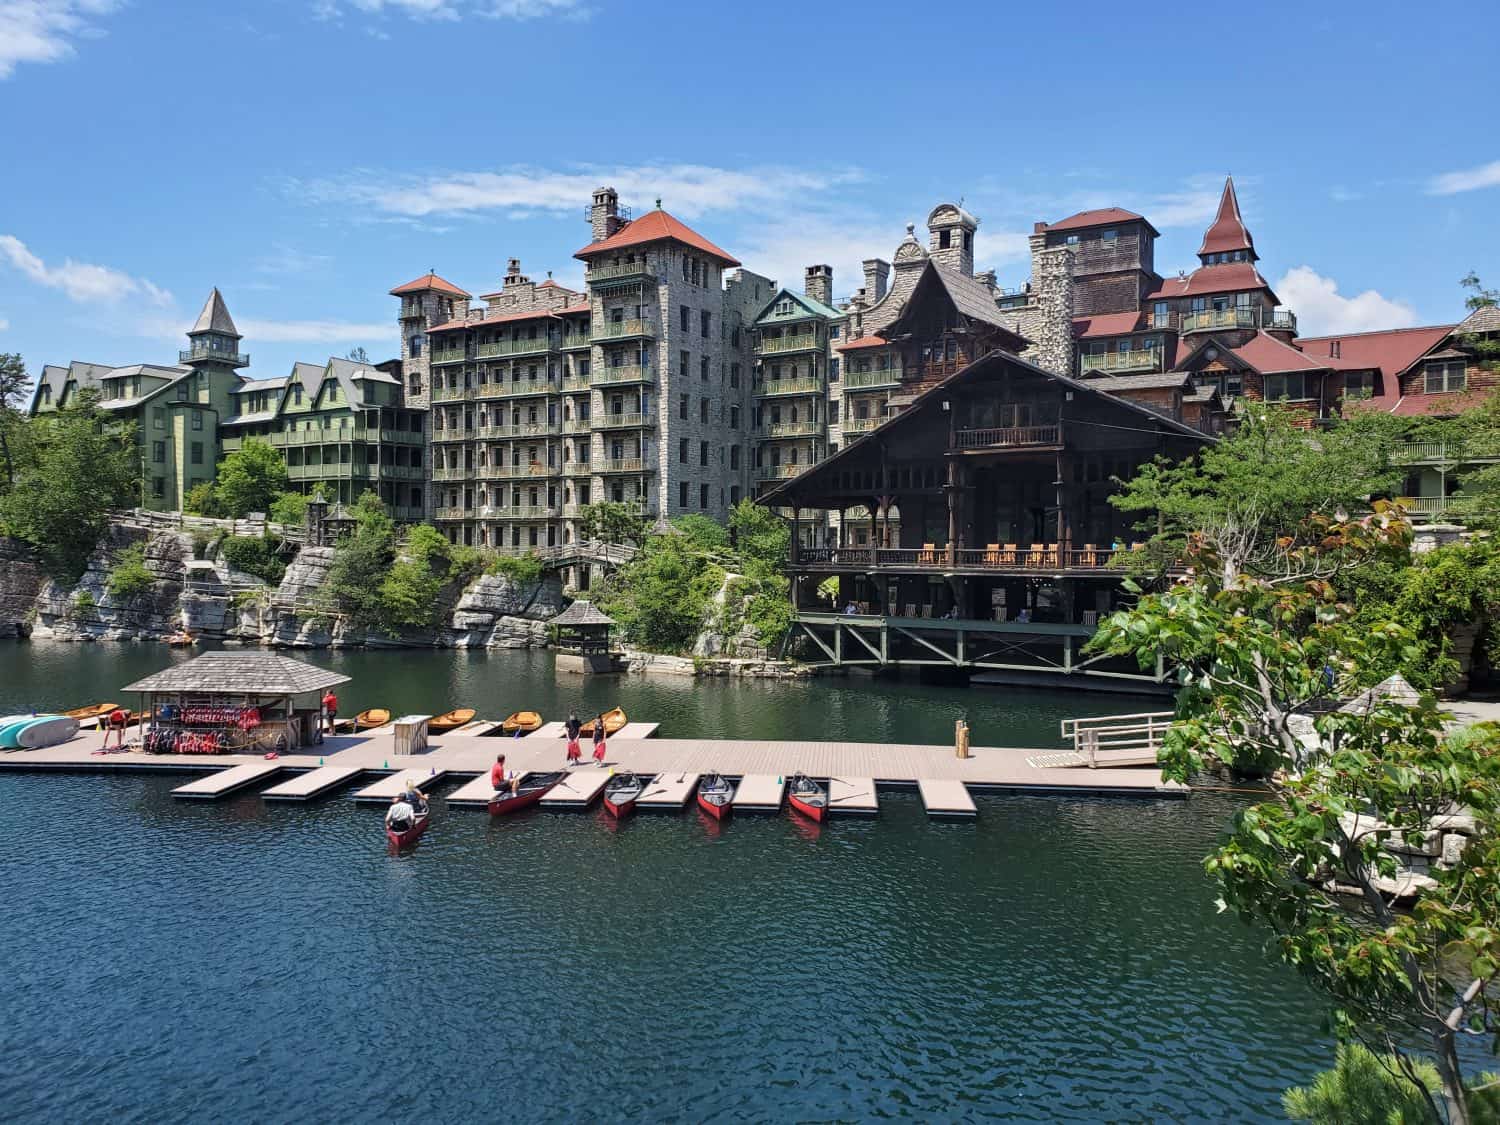 View of Mount Mohonk House that looks like a spectacular castle.